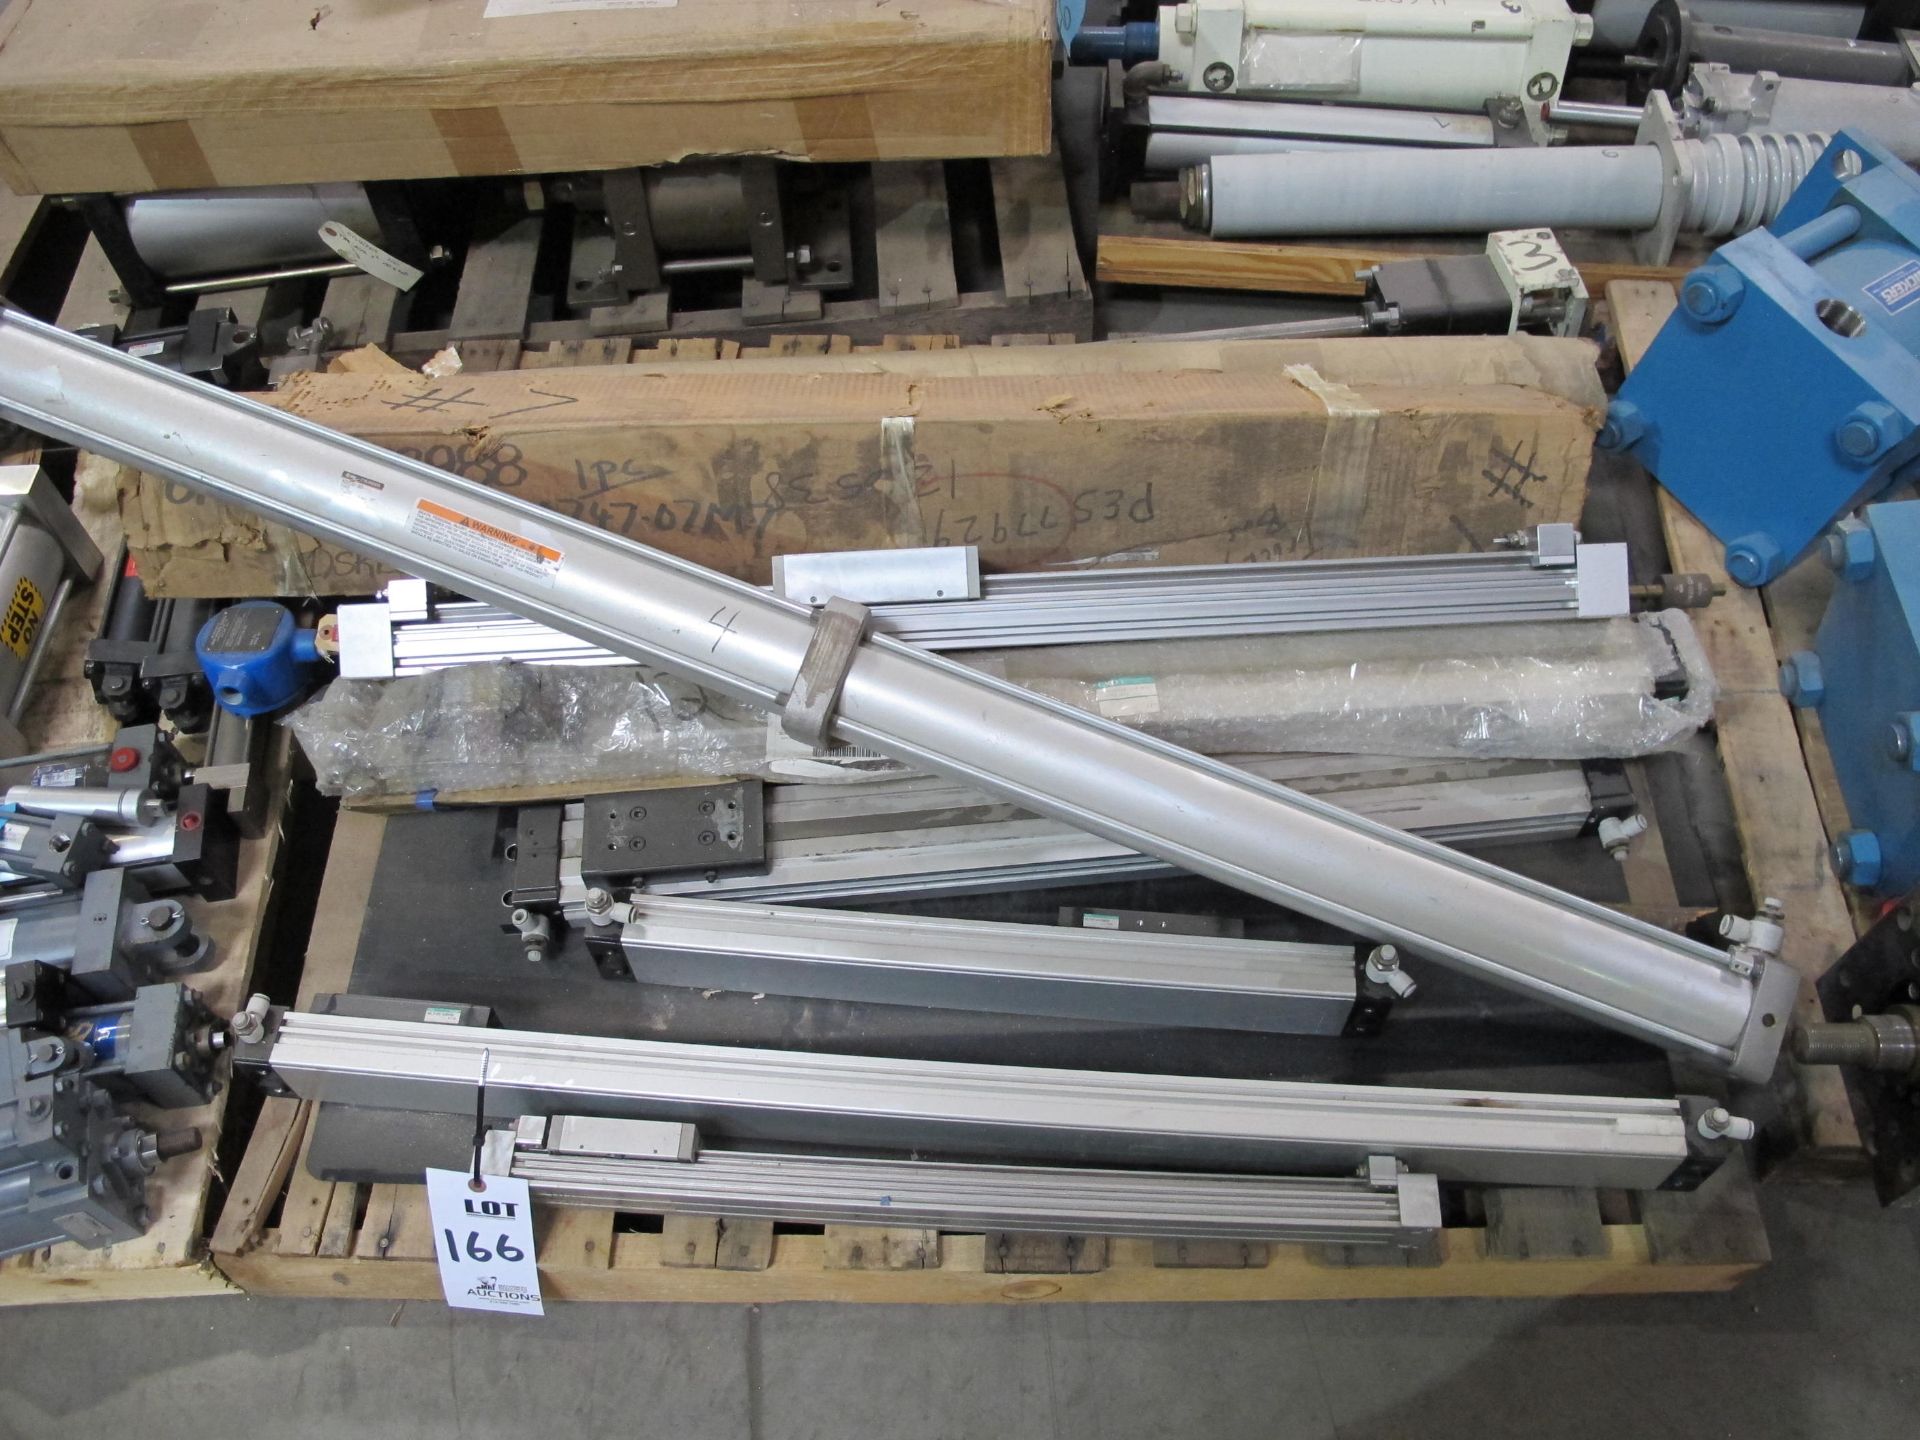 PALLET LOT TO INCLUDE BUT NOT LIMITED TO: IMO GEMS LEVEL SENSOR, RAMS, SMC AND CKD CYLINDERS,